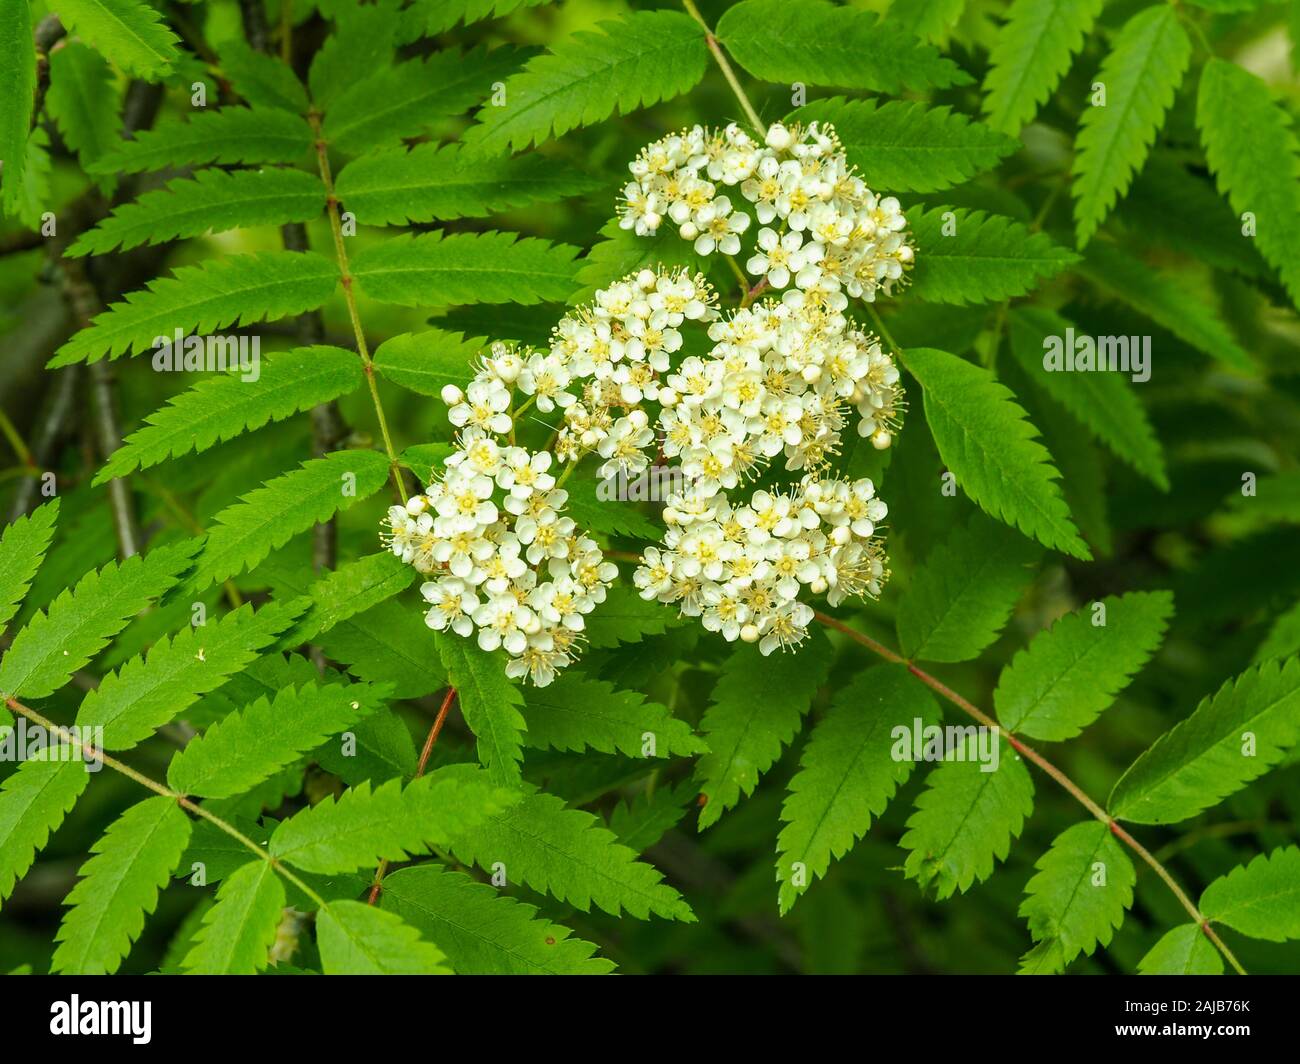 Cream coloured flowers and green leaves on a rowan tree, Sorbus Stock Photo